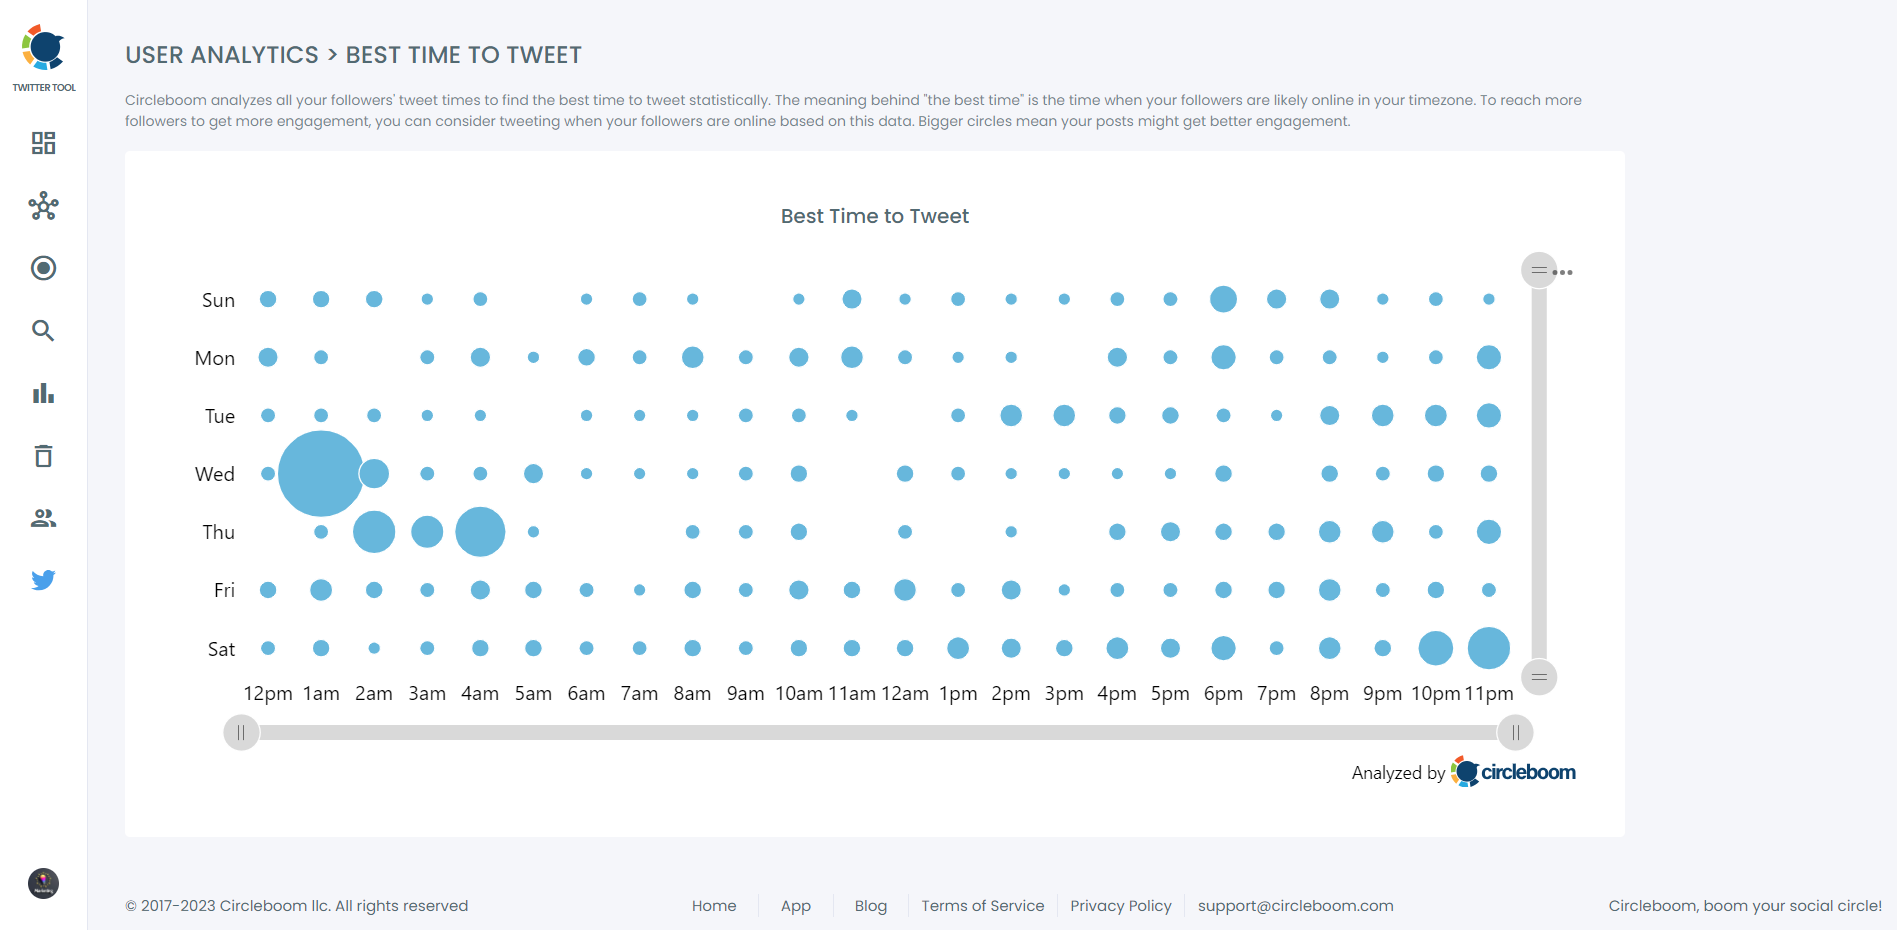 Learning best time to Tweet will bring you more engagement, and eventually more followers.